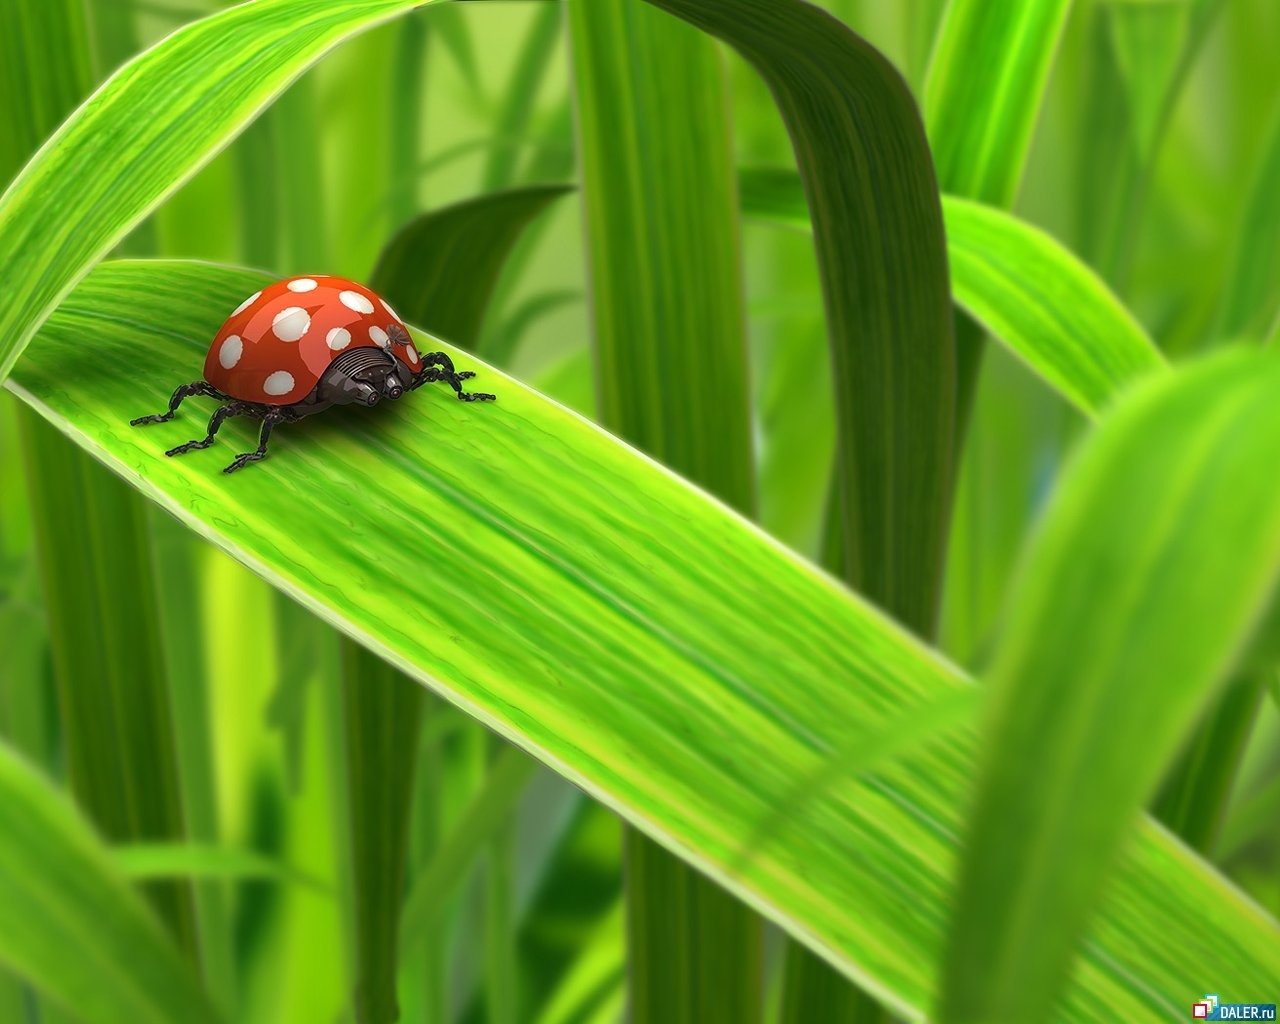 grass, insects, art, ladybugs, green